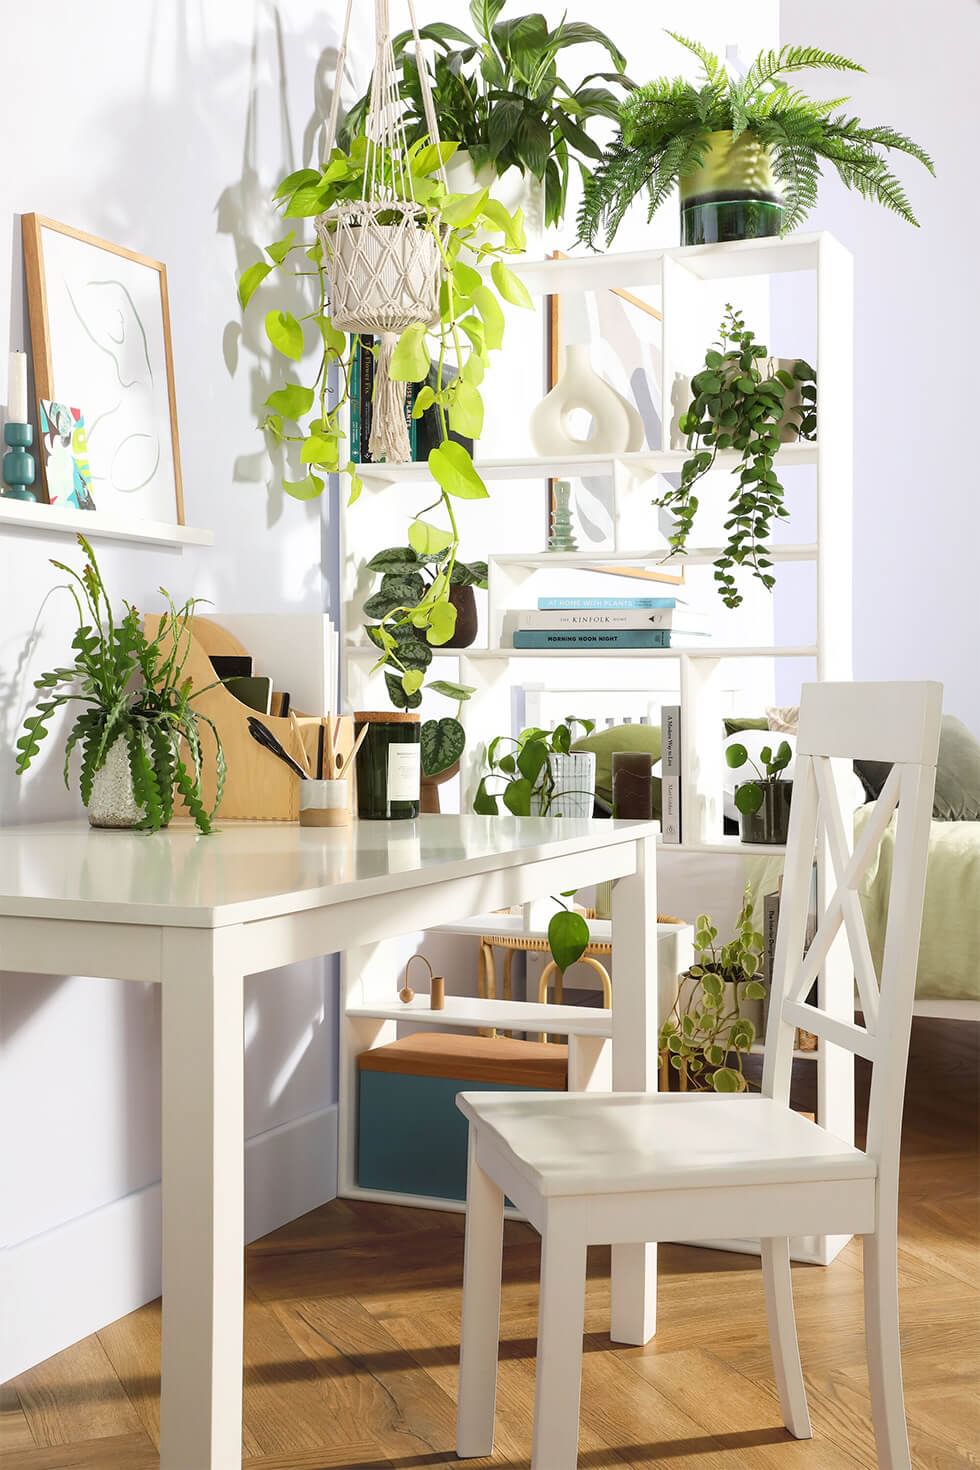 Work from home area with shelving and greenery